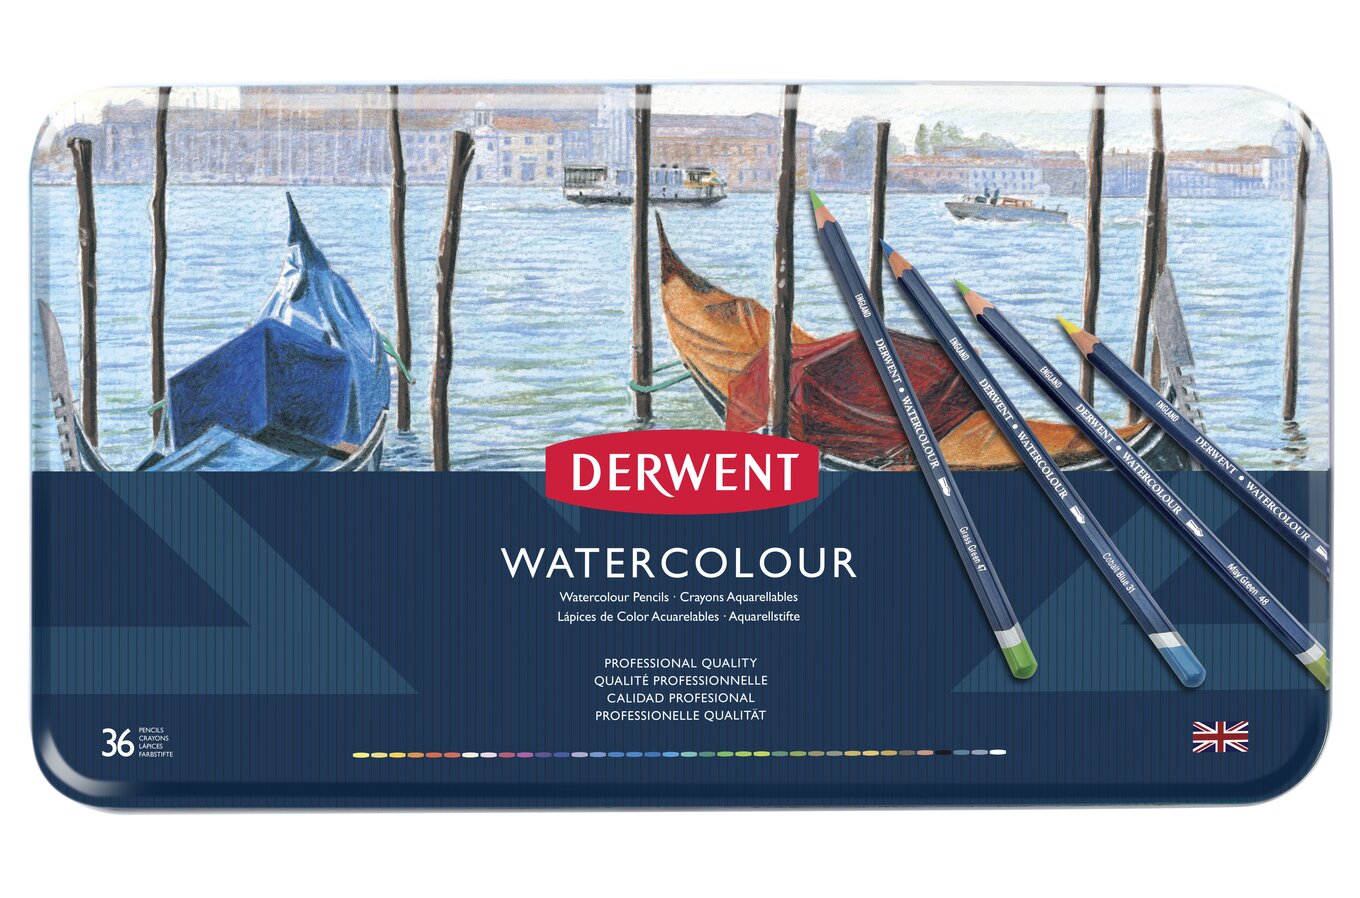 Derwent Watercolor Pencil Review & Painting Tips - Lachri 🎨 